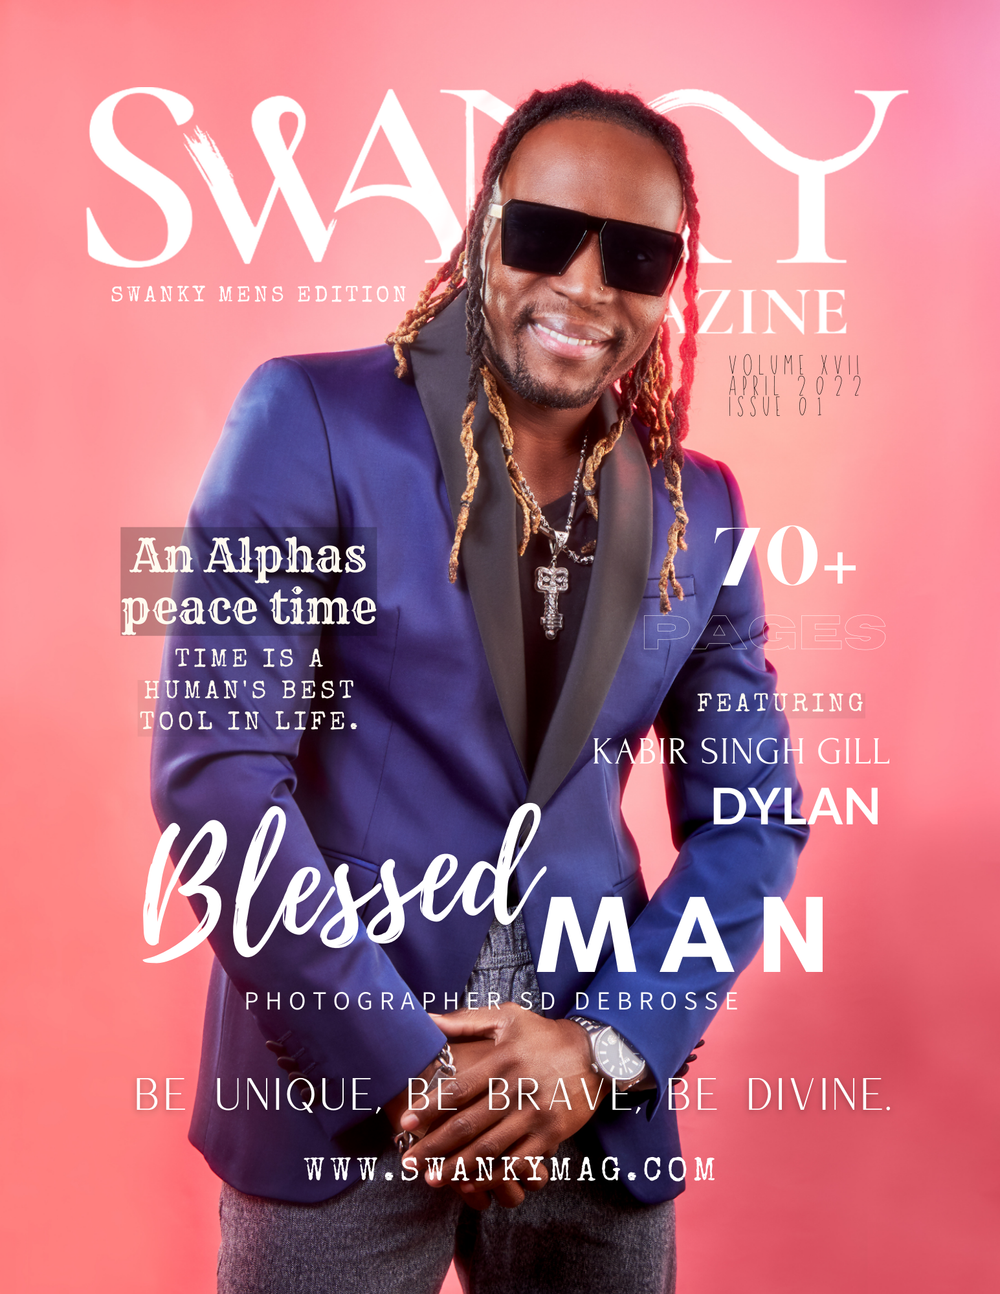 Swanky Magazine April 2022 Men's Editions VOL XVII ISSUE 1 - PRINT ISSUE